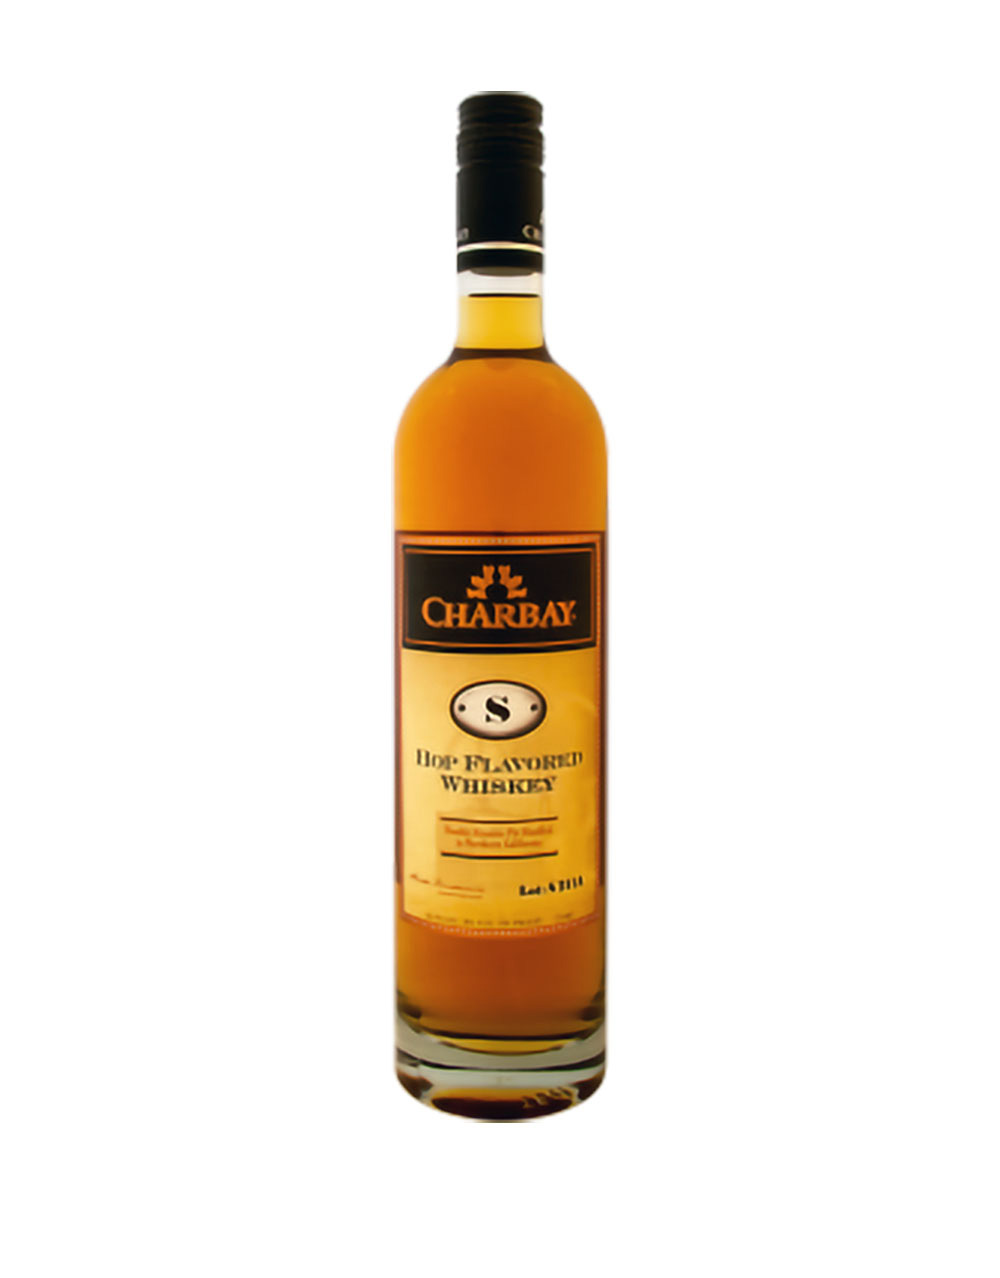 The Macallan Triple Cask Matured 15 Year Old